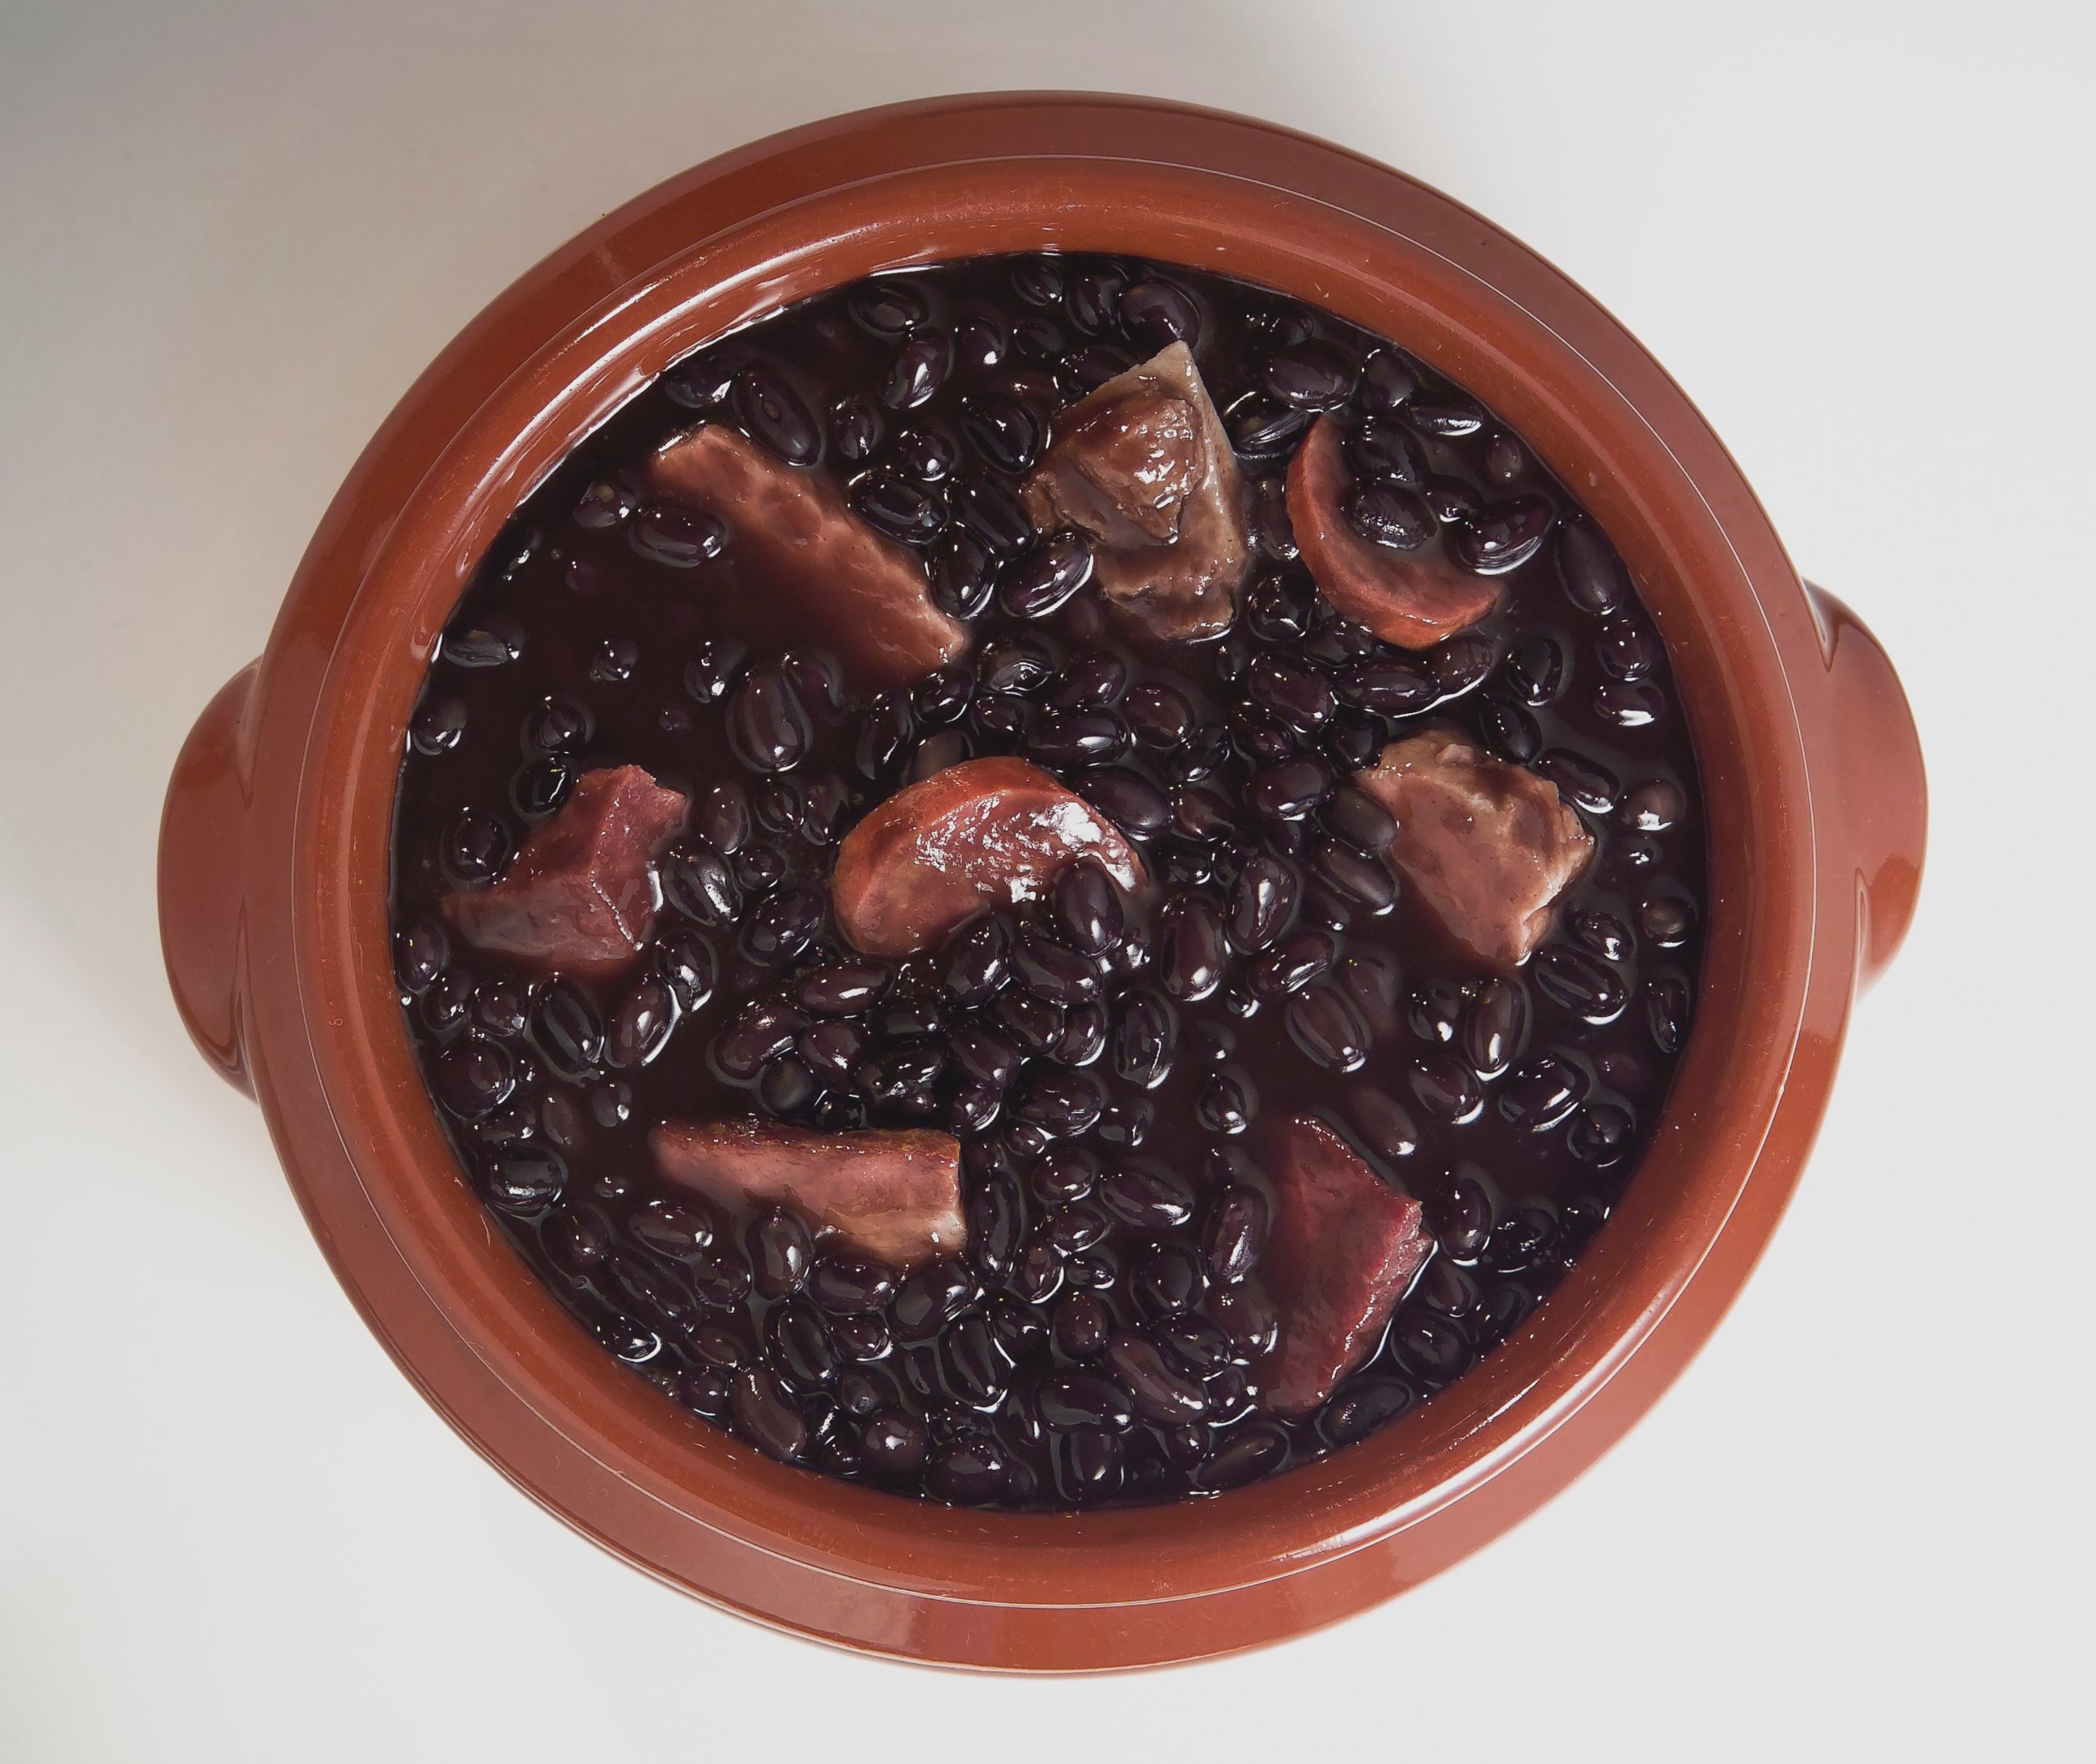 PHOTO: Feijoada is a stew of beans with beef and pork meats, which is a typical Portuguese dish. In Brazil, feijoada is considered the national dish.